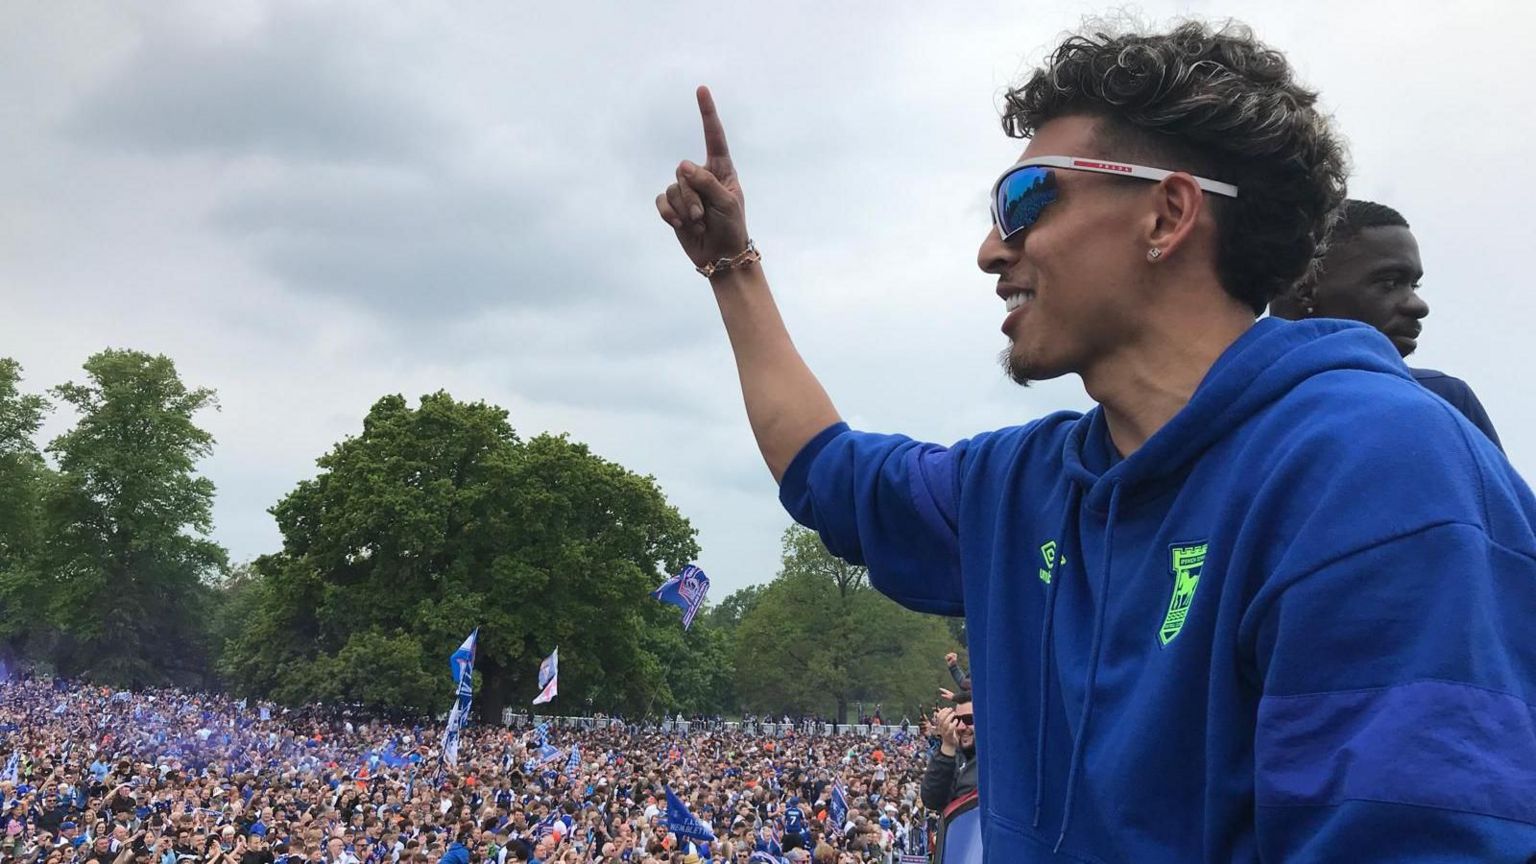 Jeremy Sarmiento holds a finger up to a crowd of Ipswich Town FC fans